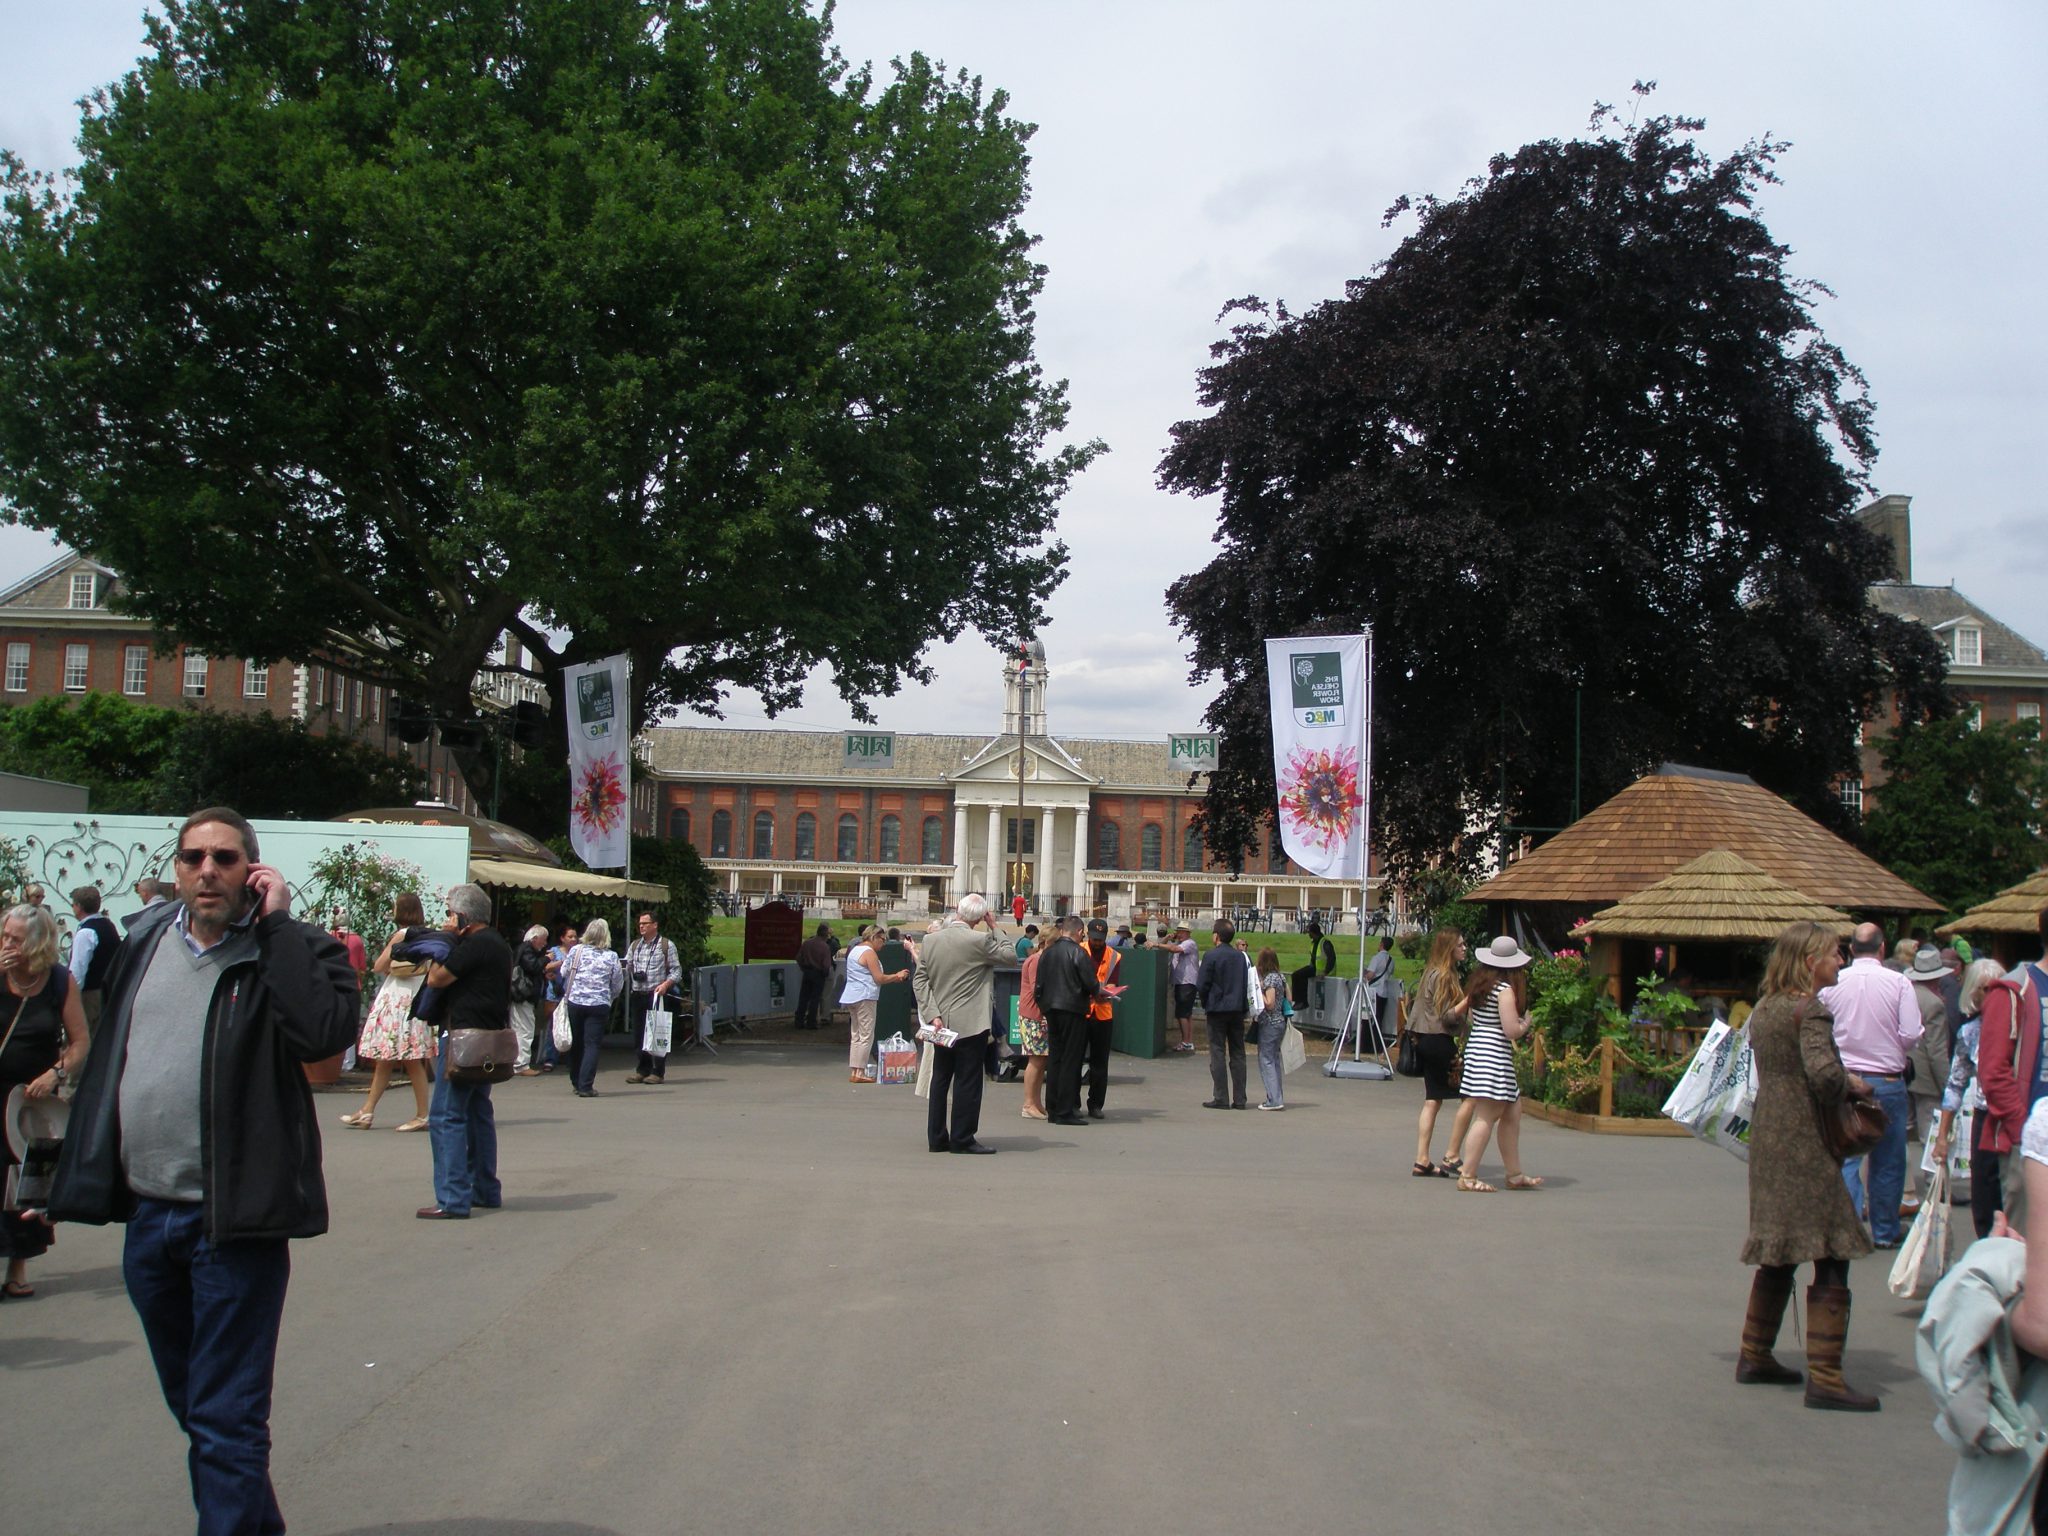 The Royal Hospital, seen from the grounds of the Chelsea Flower Show.